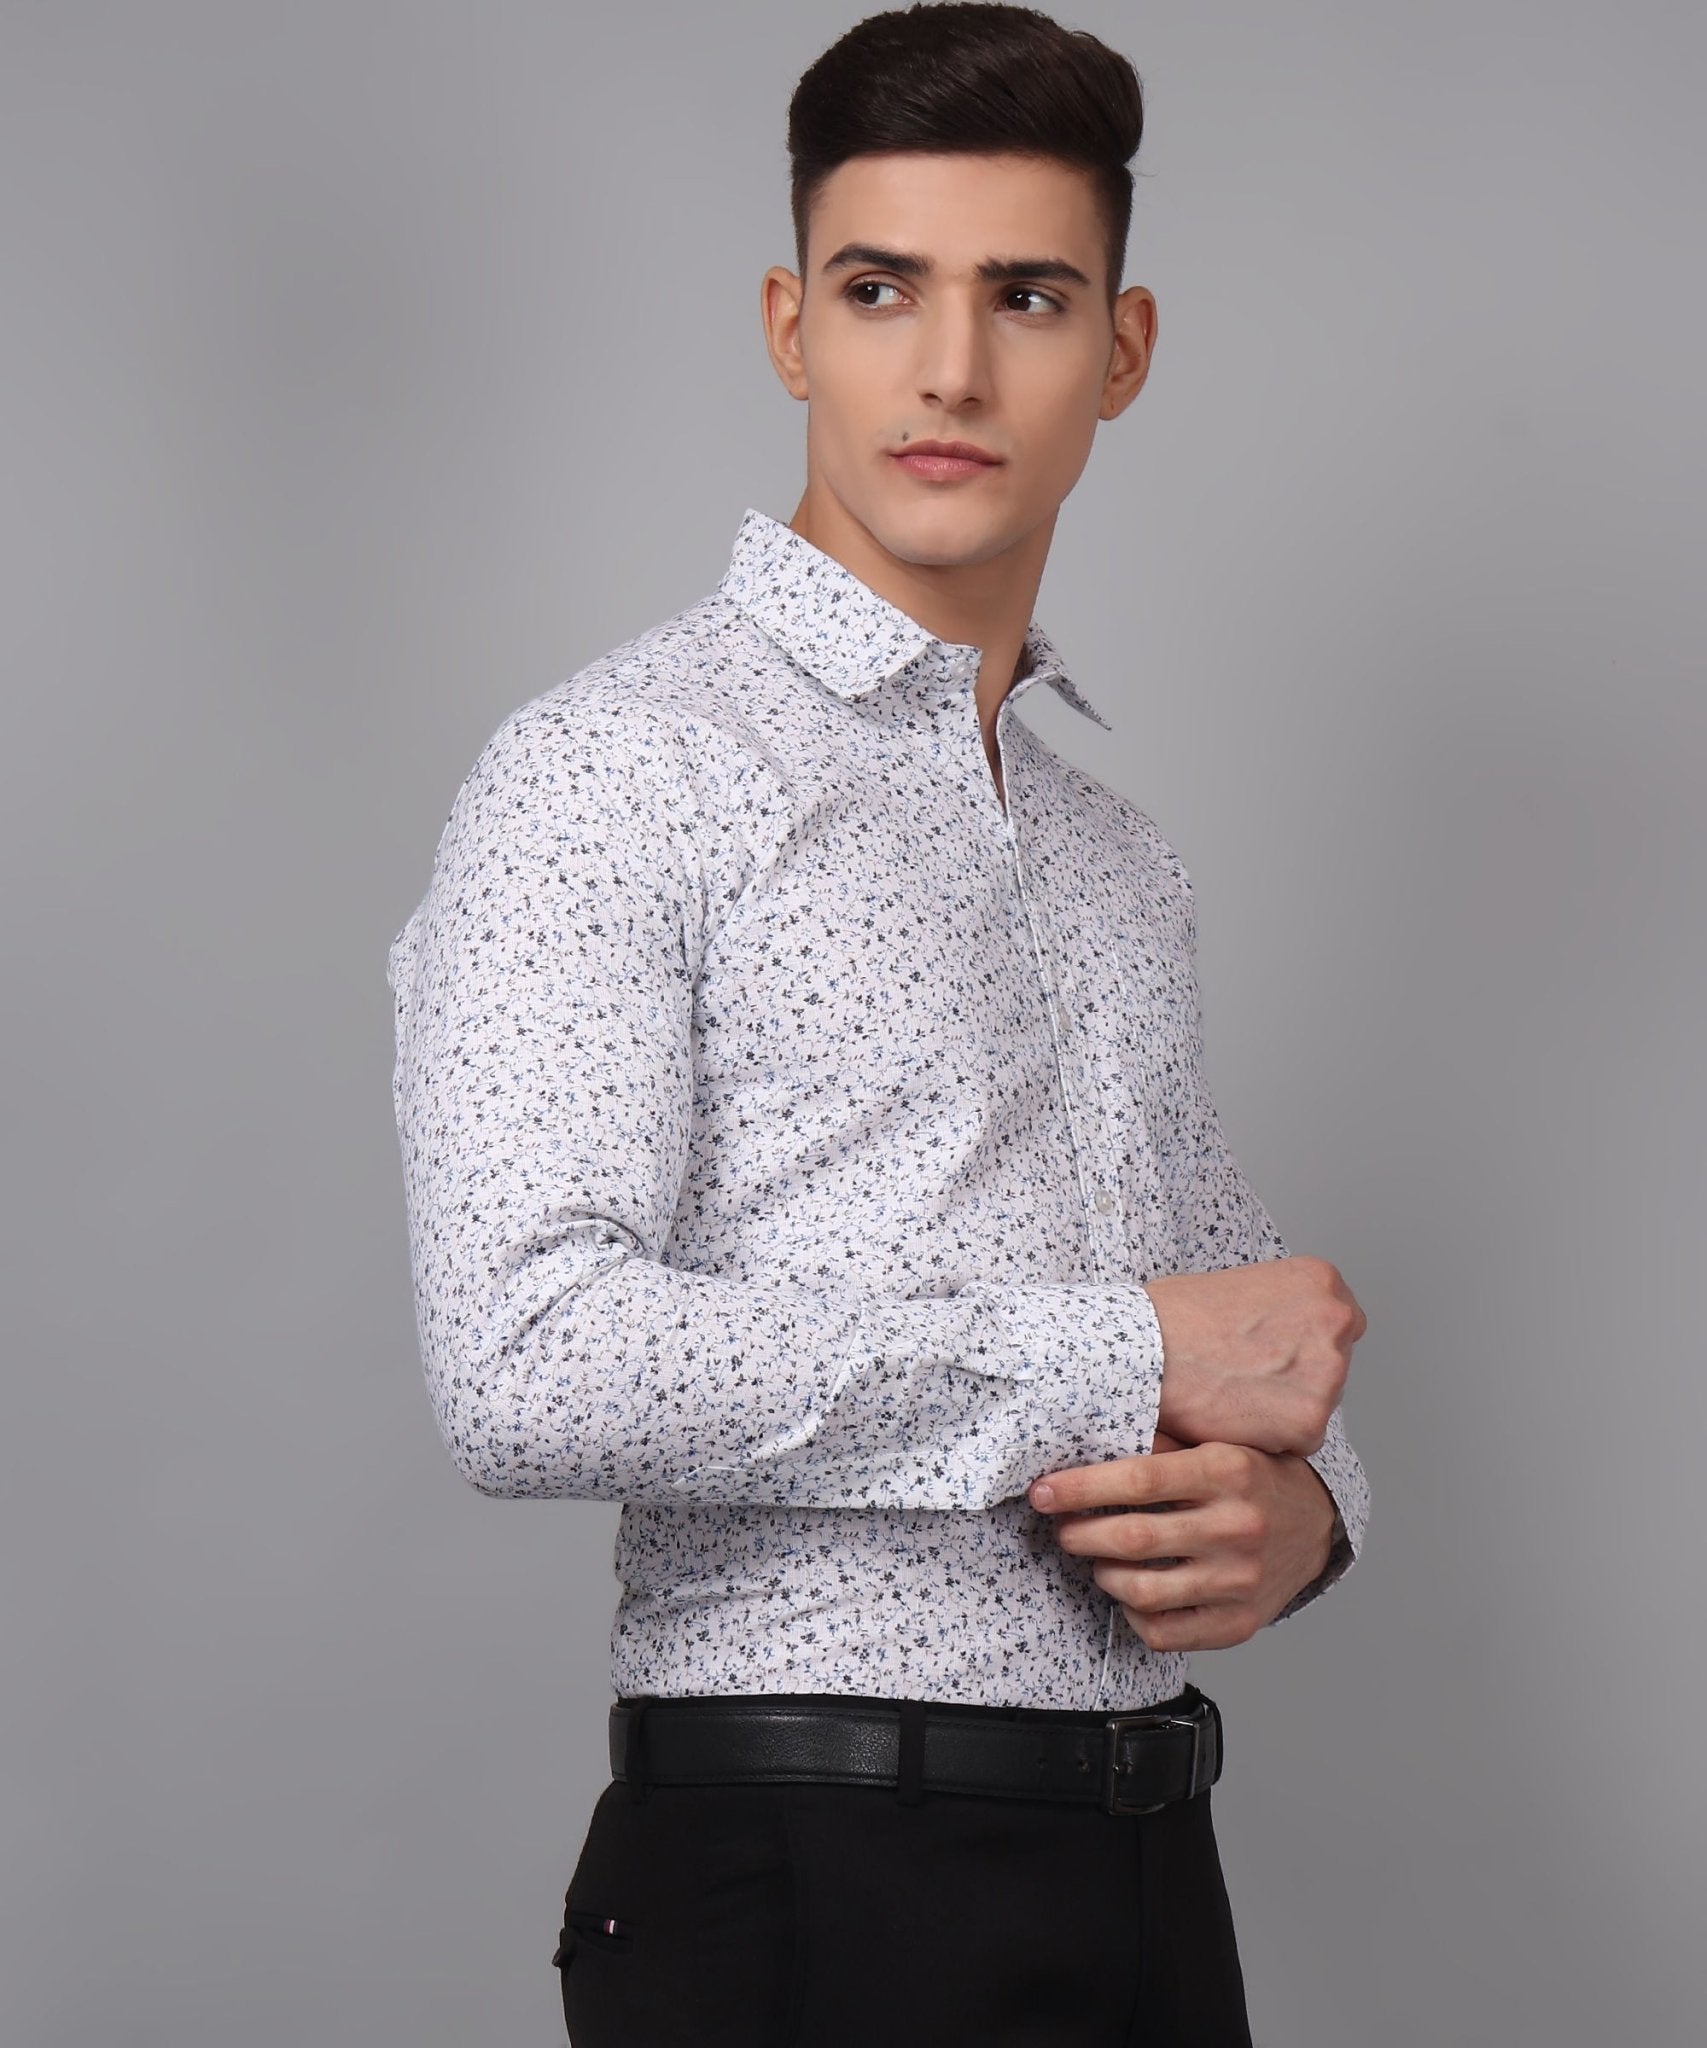 Luxurious Edition TryBuy Premium Cotton Linen Printed Casual/Formal Shirt for Men - TryBuy® USA🇺🇸